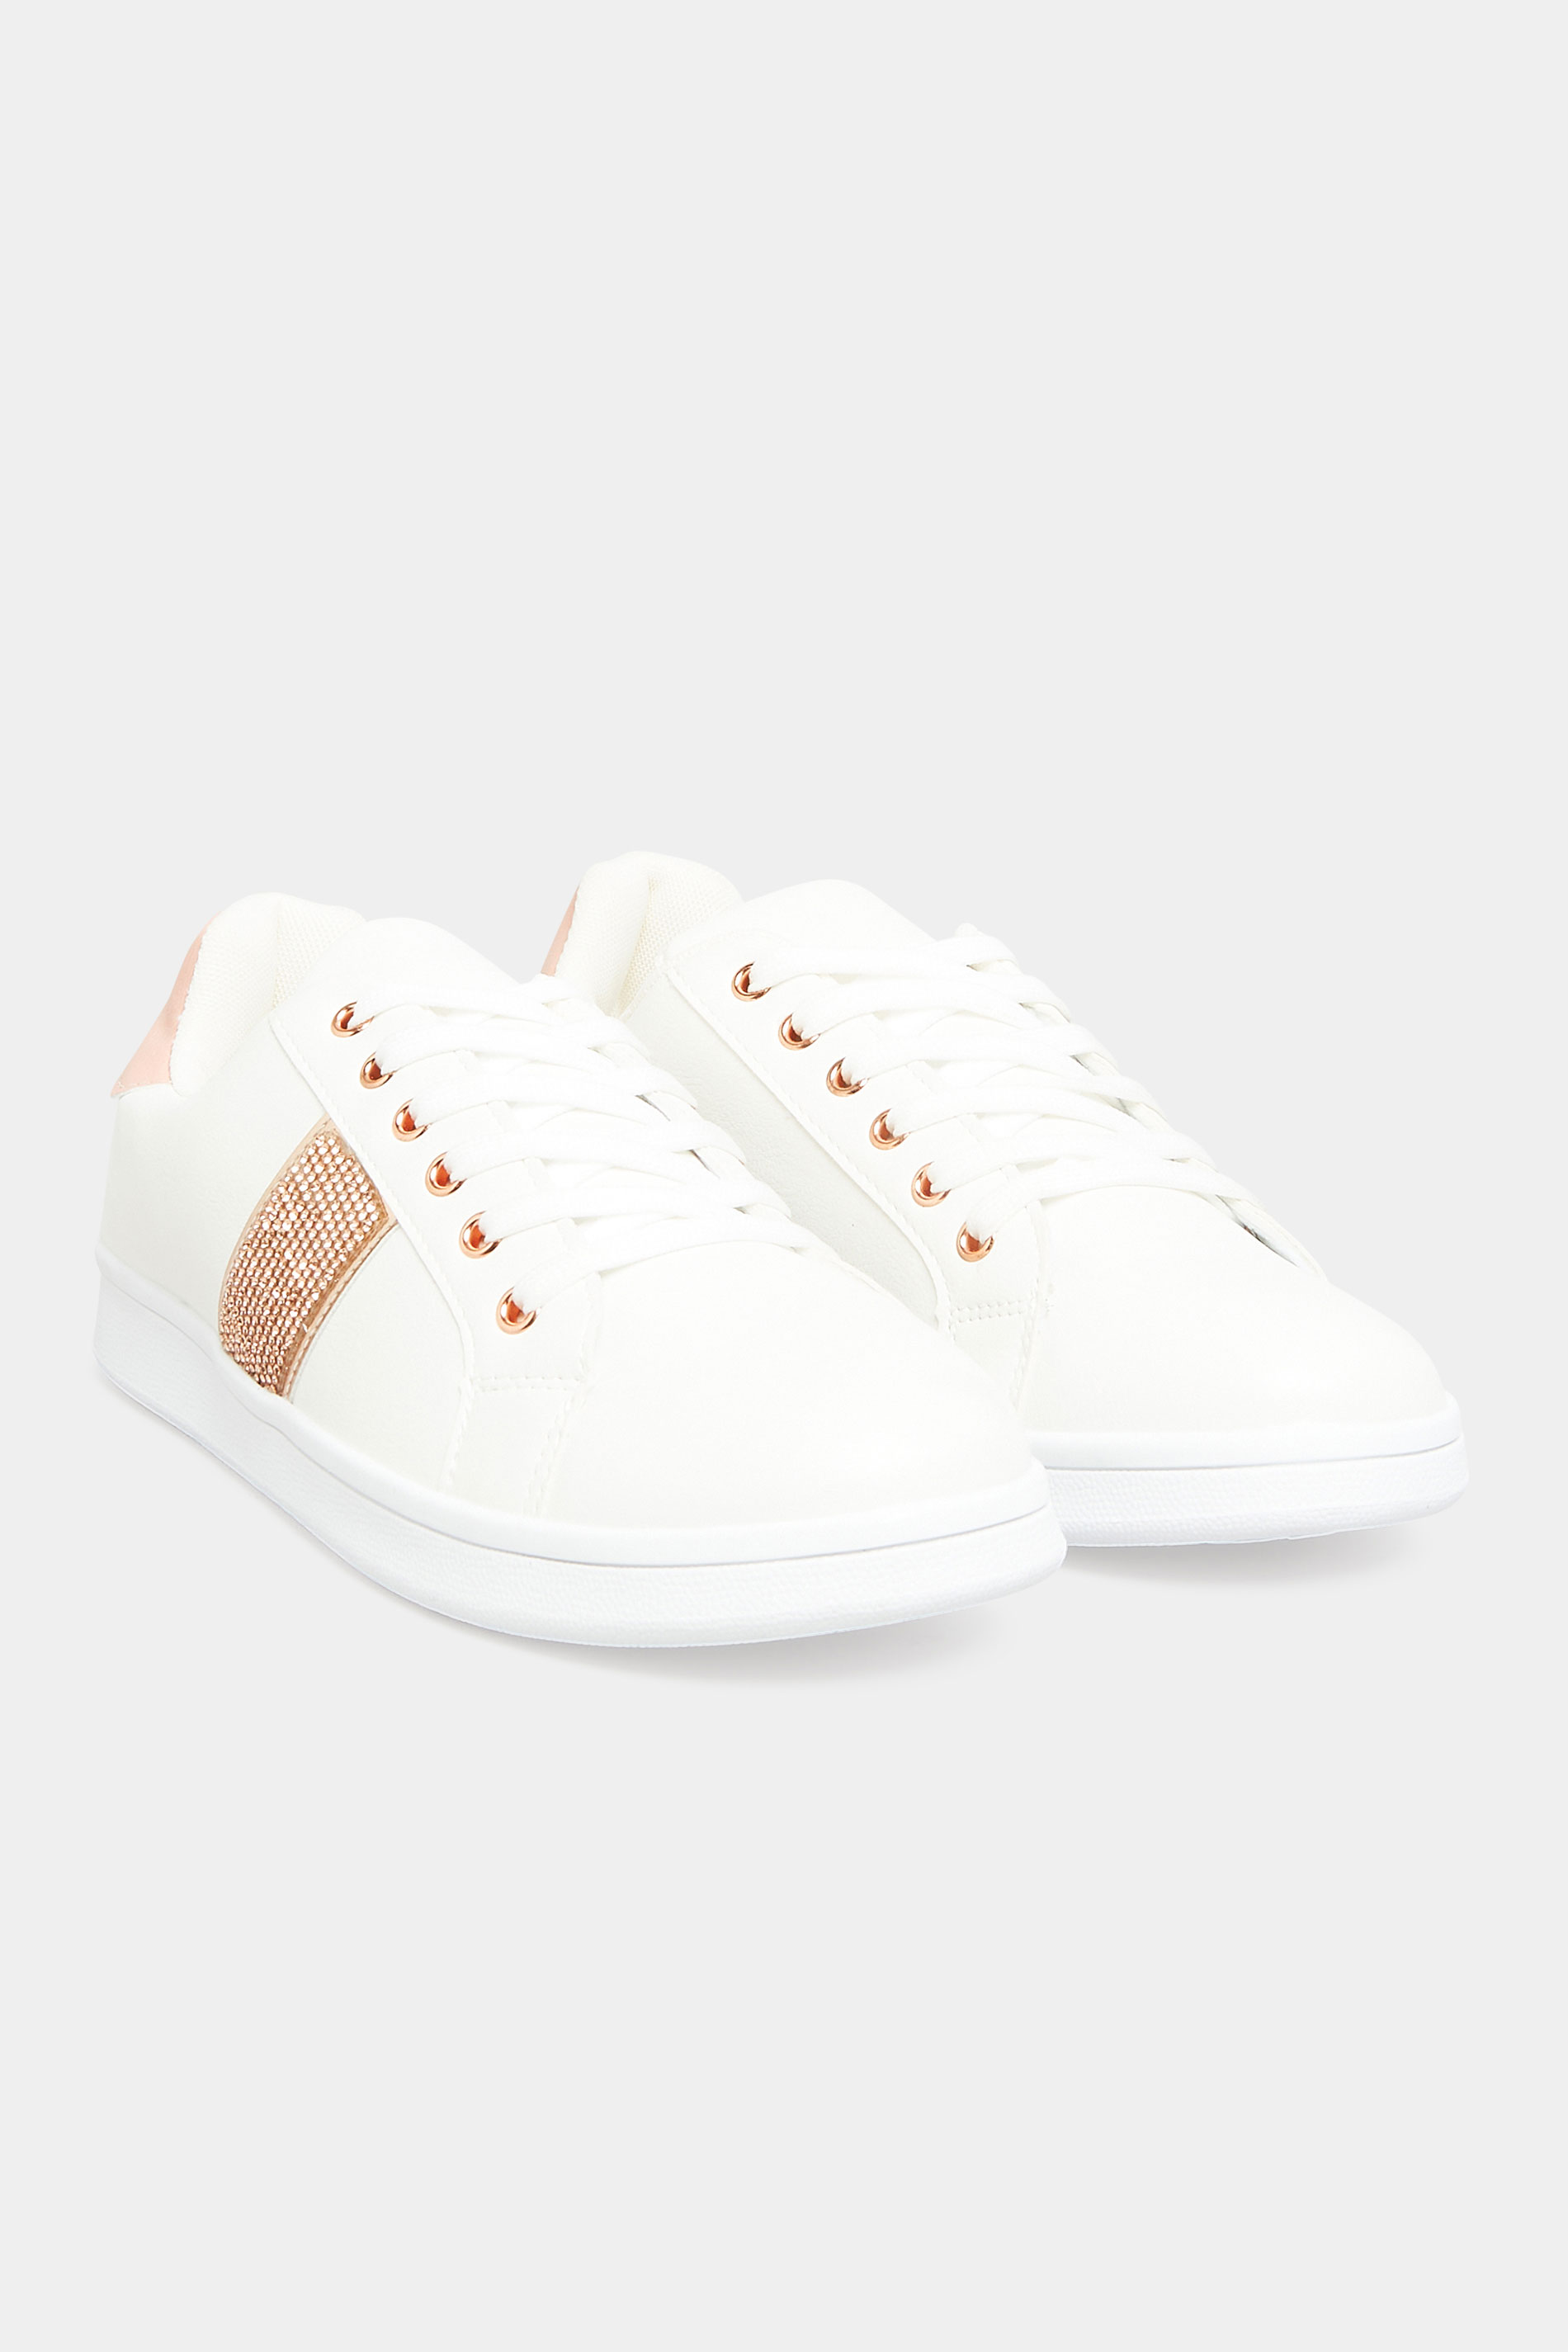 Chaussures Pieds Larges Tennis & Baskets (Regular Fit & Pieds Larges) | Tennis Blanches & Roses Gold à Strass Pieds Larges E - OV87984